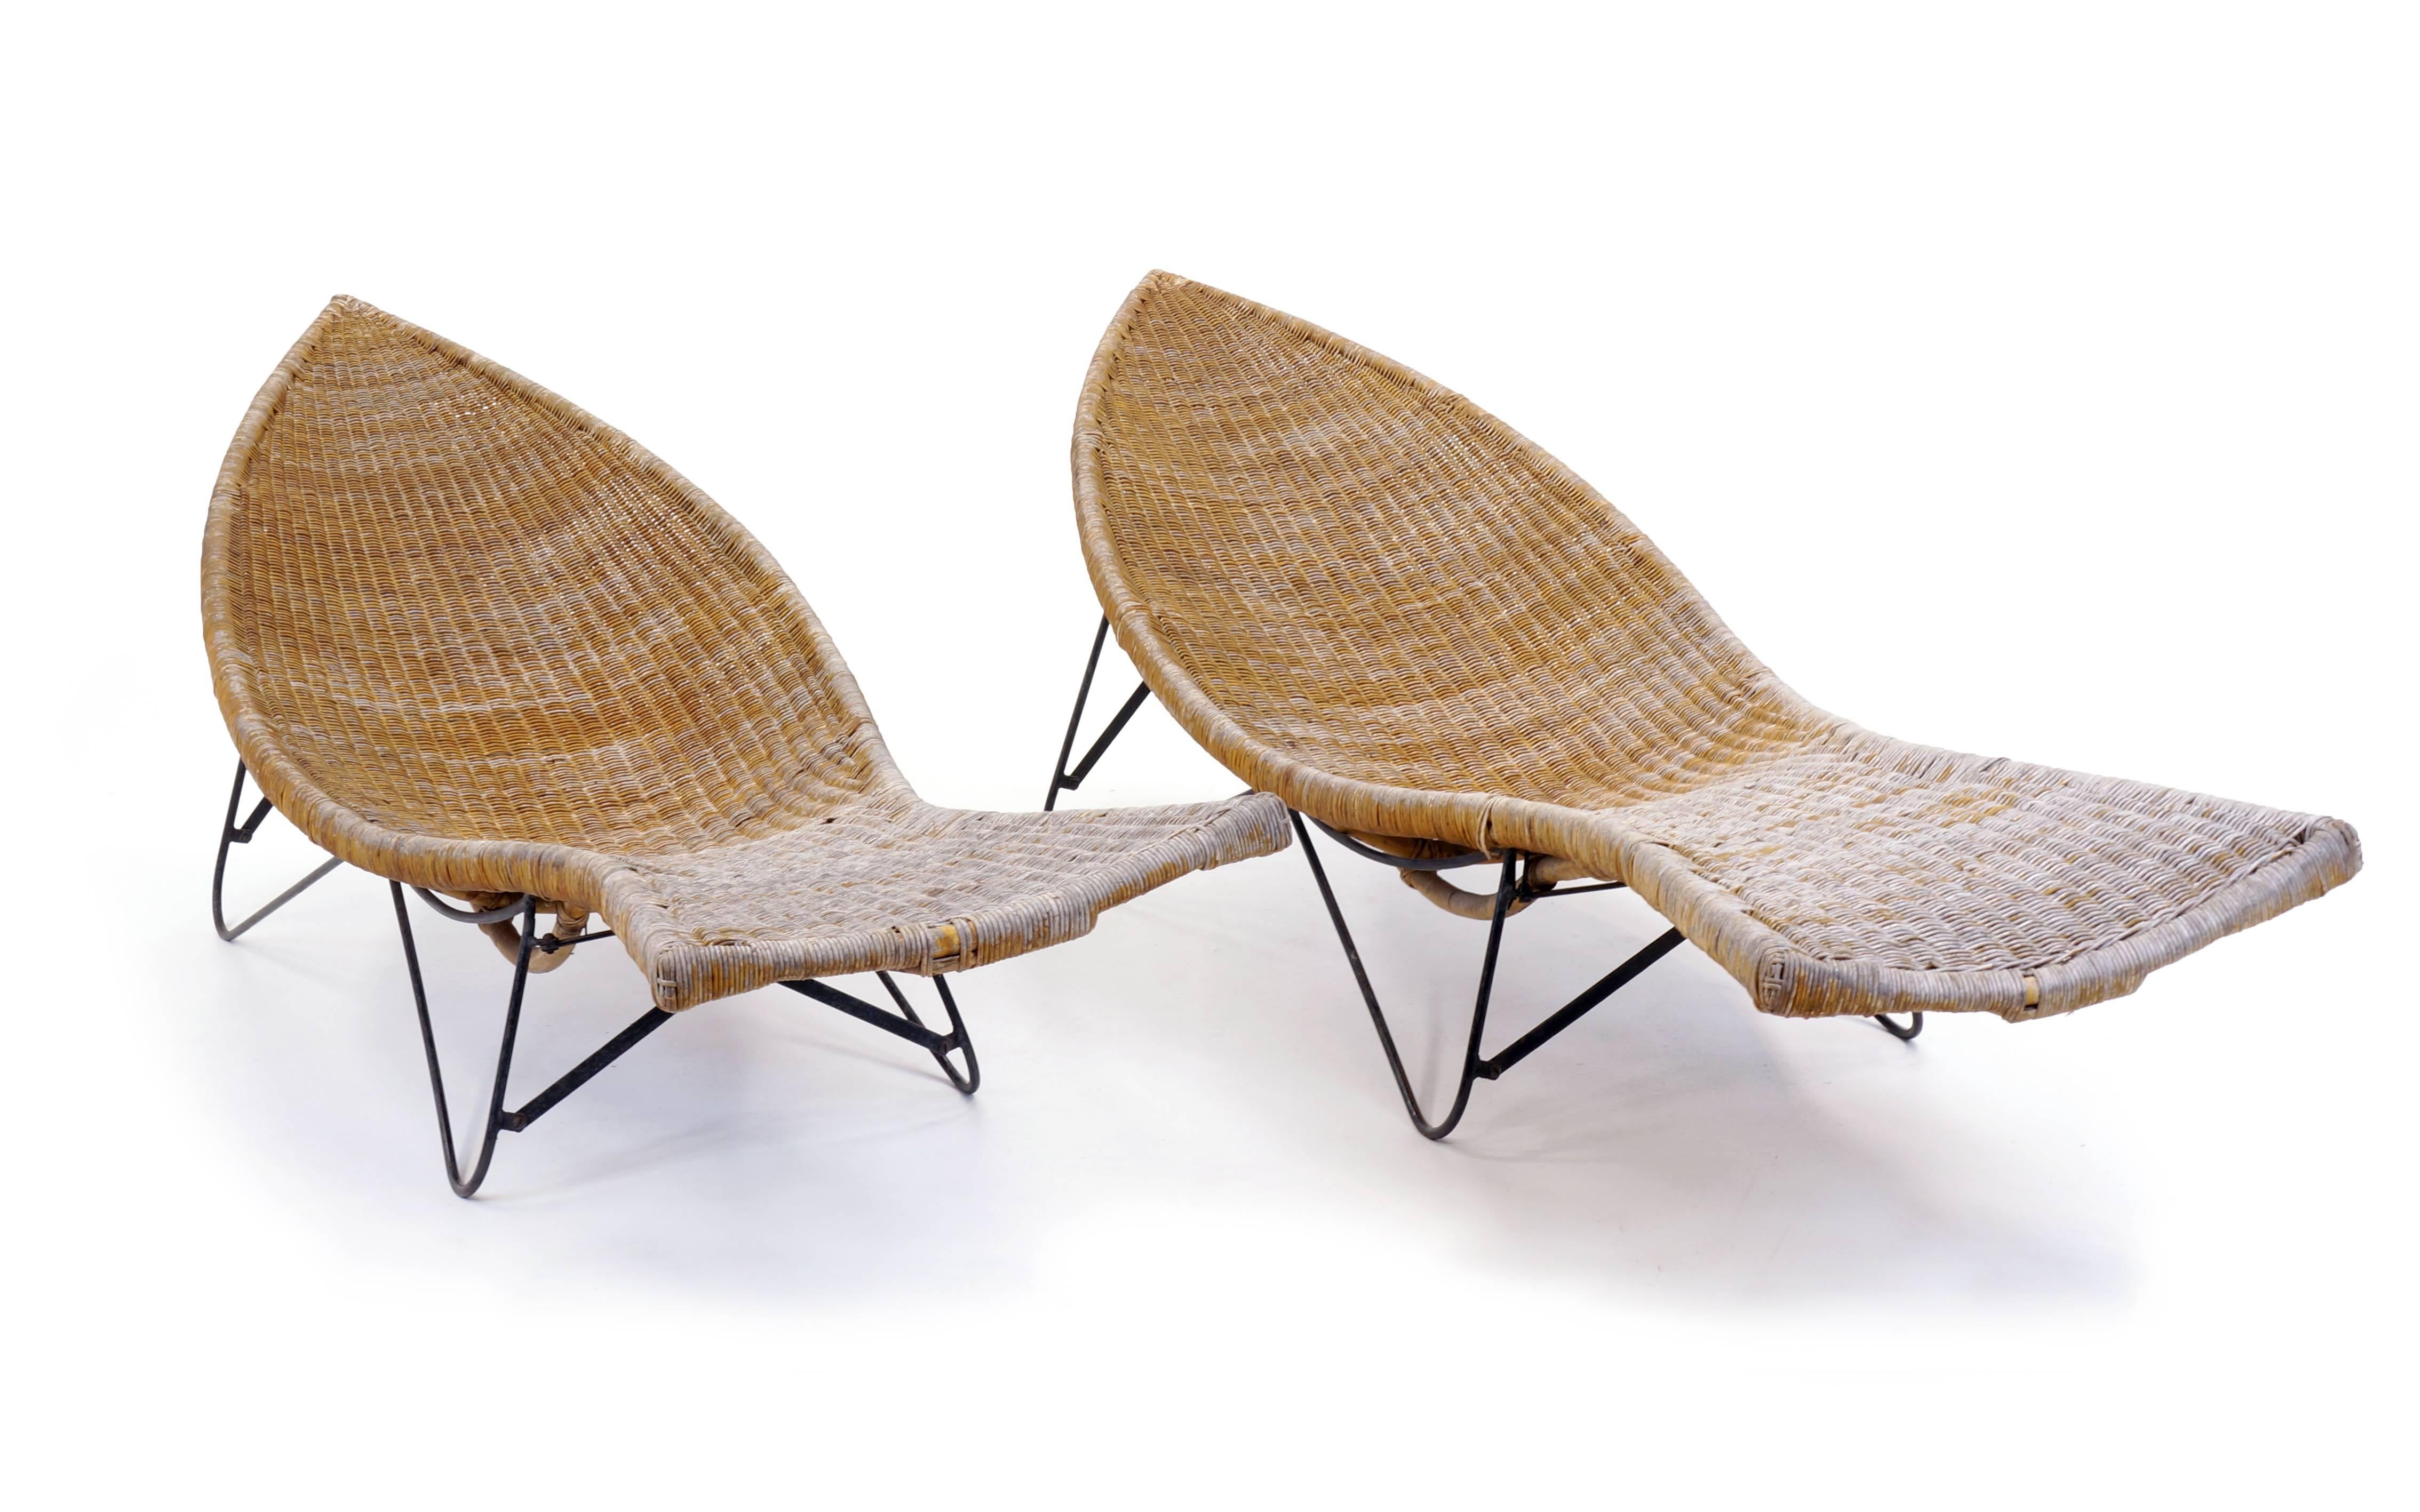 Awesome, large-scale pair of 1950s pool side chaises. The designer is unknown to us, but these are special. High quality construction and structurally sound. Some wear and weathering to the woven wicker as seen in the photos.